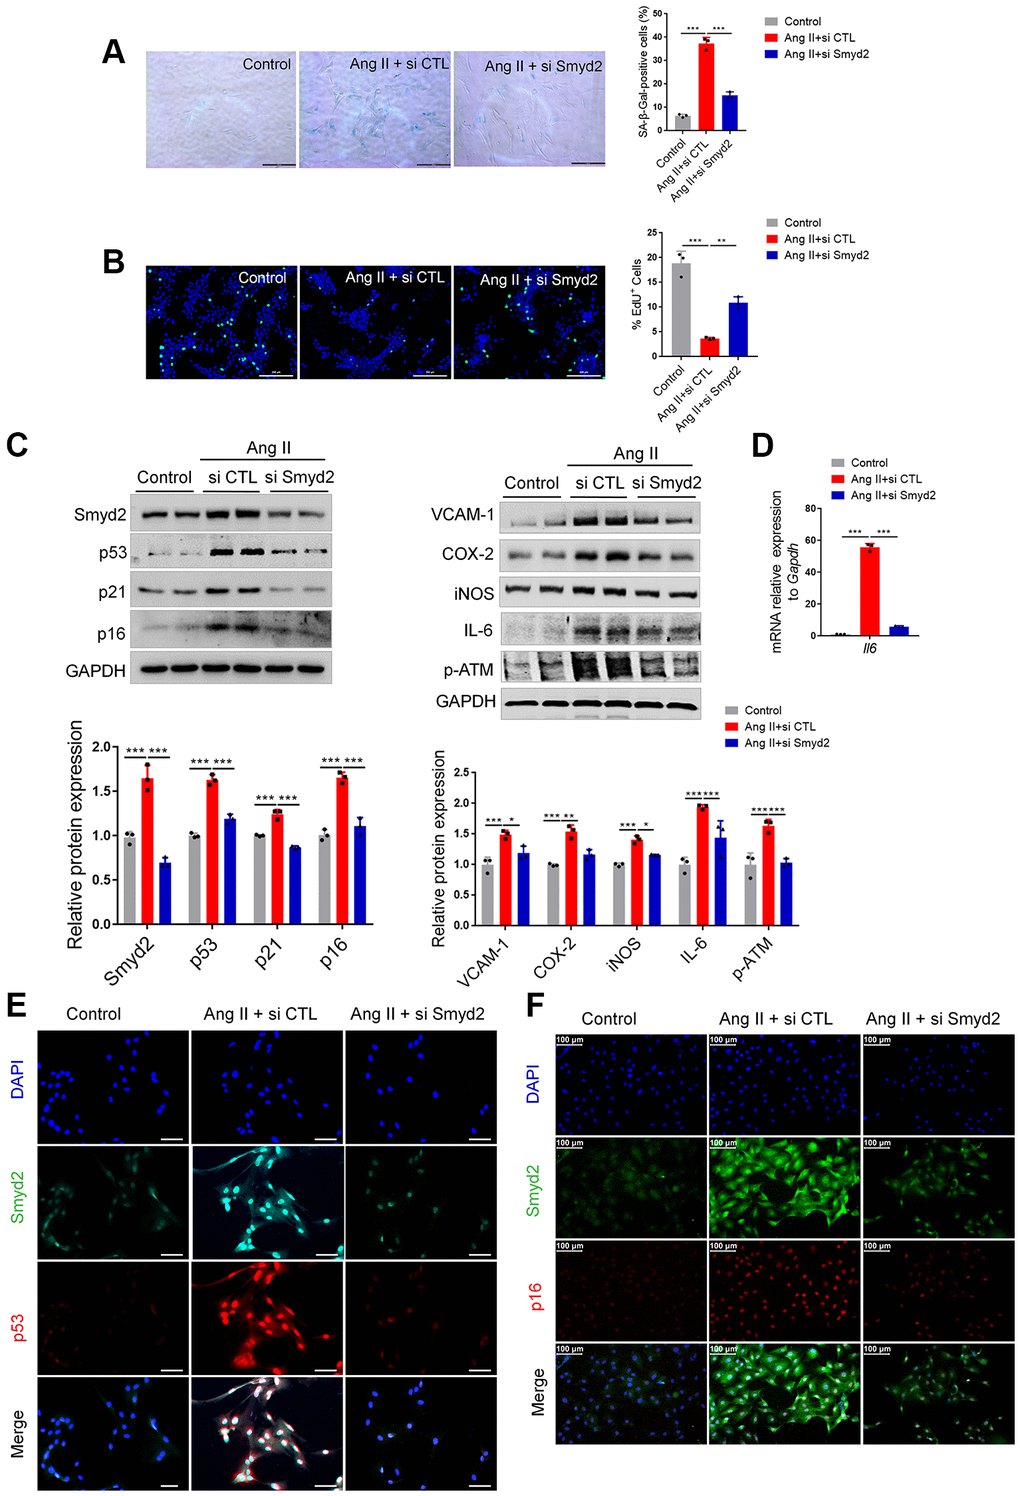 Knockdown of Smyd2 attenuates Ang II-induced RAECs senescence. Smyd2 was knocked down using si Smyd2 in Ang II-induced RAECs, si CTL was used as the negative control. (A, B) The SA-β-gal staining and EdU incorporation assay. Representative staining images are shown in the figure left, and the statistical analysis of positive cells is shown on the right. Scale bars, 200 μm. (C) Western blot analysis of Smyd2 and the senescence markers (p53, p21 and p16), the proinflammatory mediators (iNOS, VCAM-1, COX-2 and IL-6) and the DNA damage marker (p-ATM) protein. Representative western blot images are shown in the figure above, and the statistical analysis of relative protein expression is shown below. GAPDH was used as the loading control. (D) The mRNA expression of Il6 gene by RT-qPCR analysis. (E, F) Immunofluorescence double staining of Smyd2 and the senescence markers (p53 and p16). Scale bars, 100 μm. Data are presented as the mean ± SEMs, *p **p ***p n = 3).